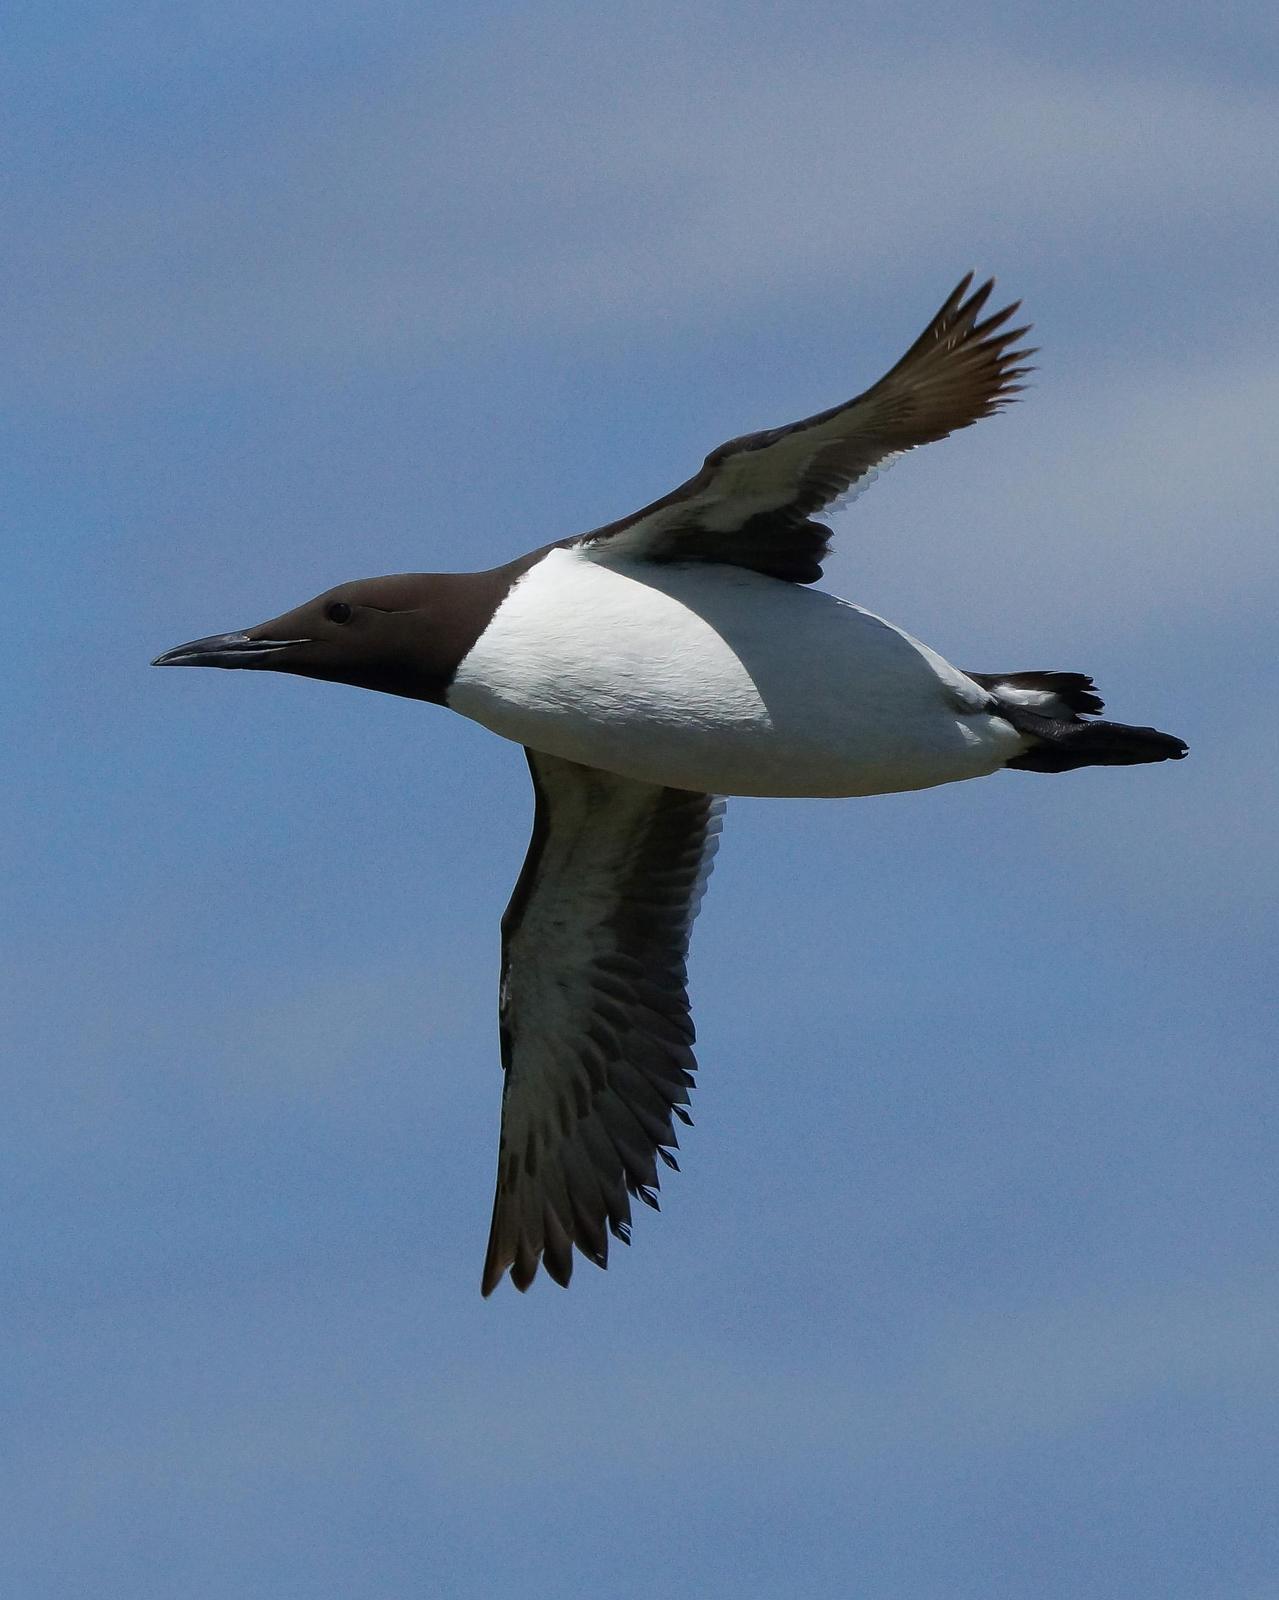 Common Murre Photo by Steve Percival